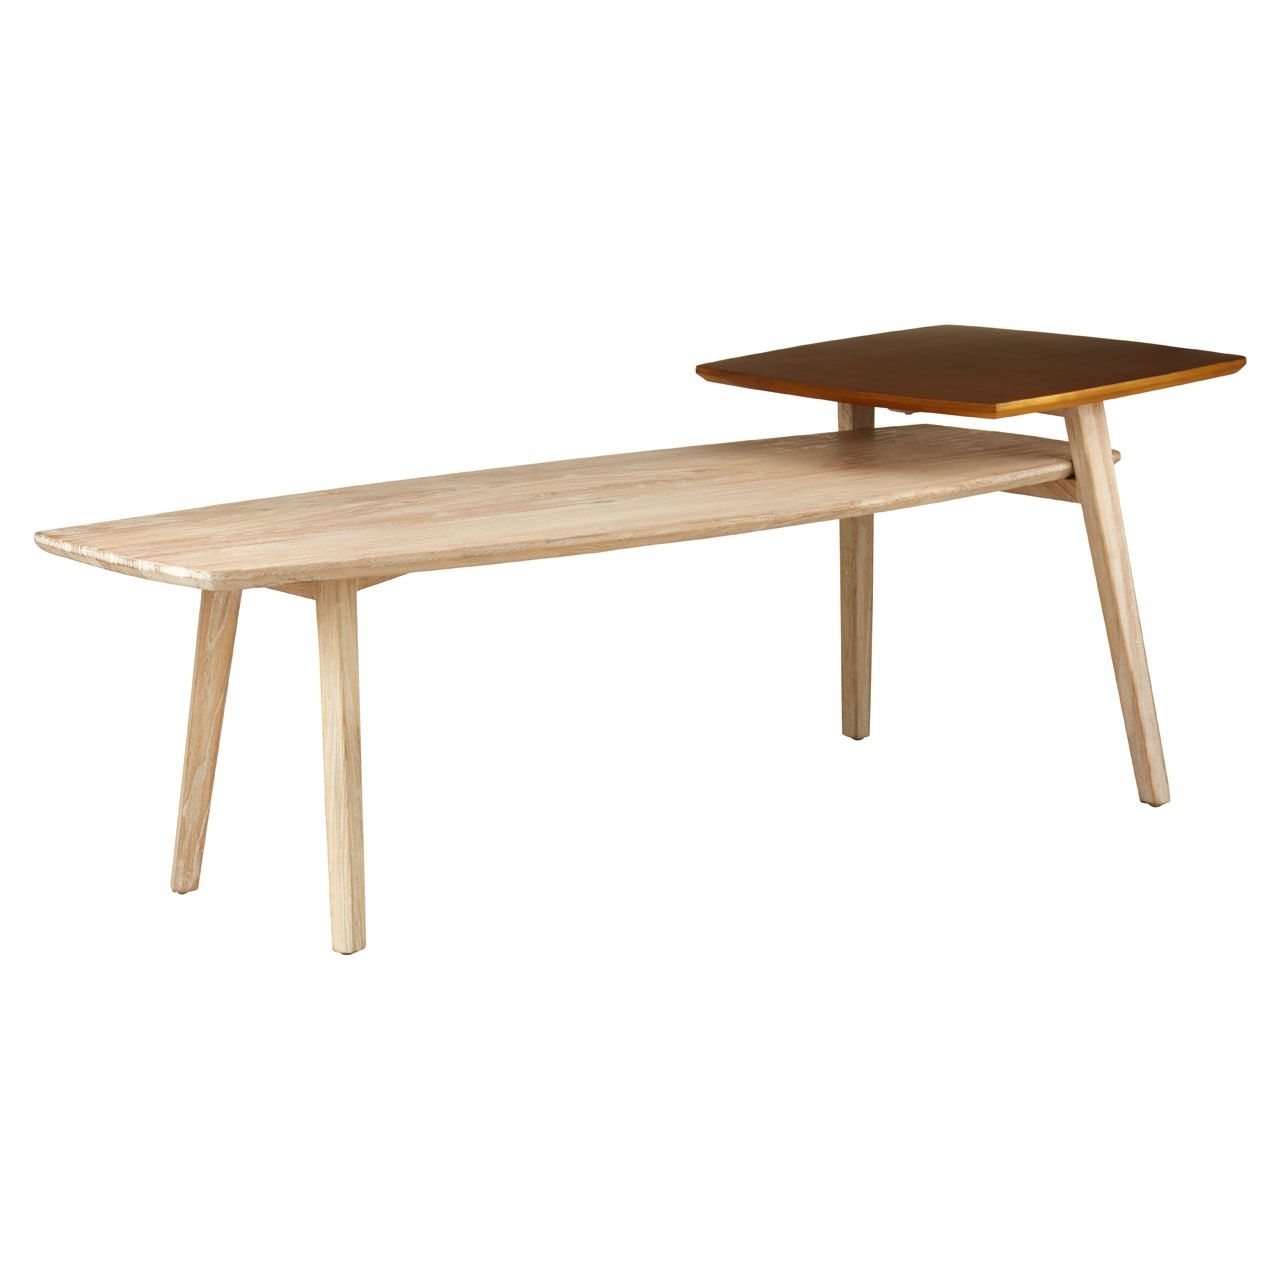 Kyra Wooden Coffee Table In Light Grey With Gold Accents